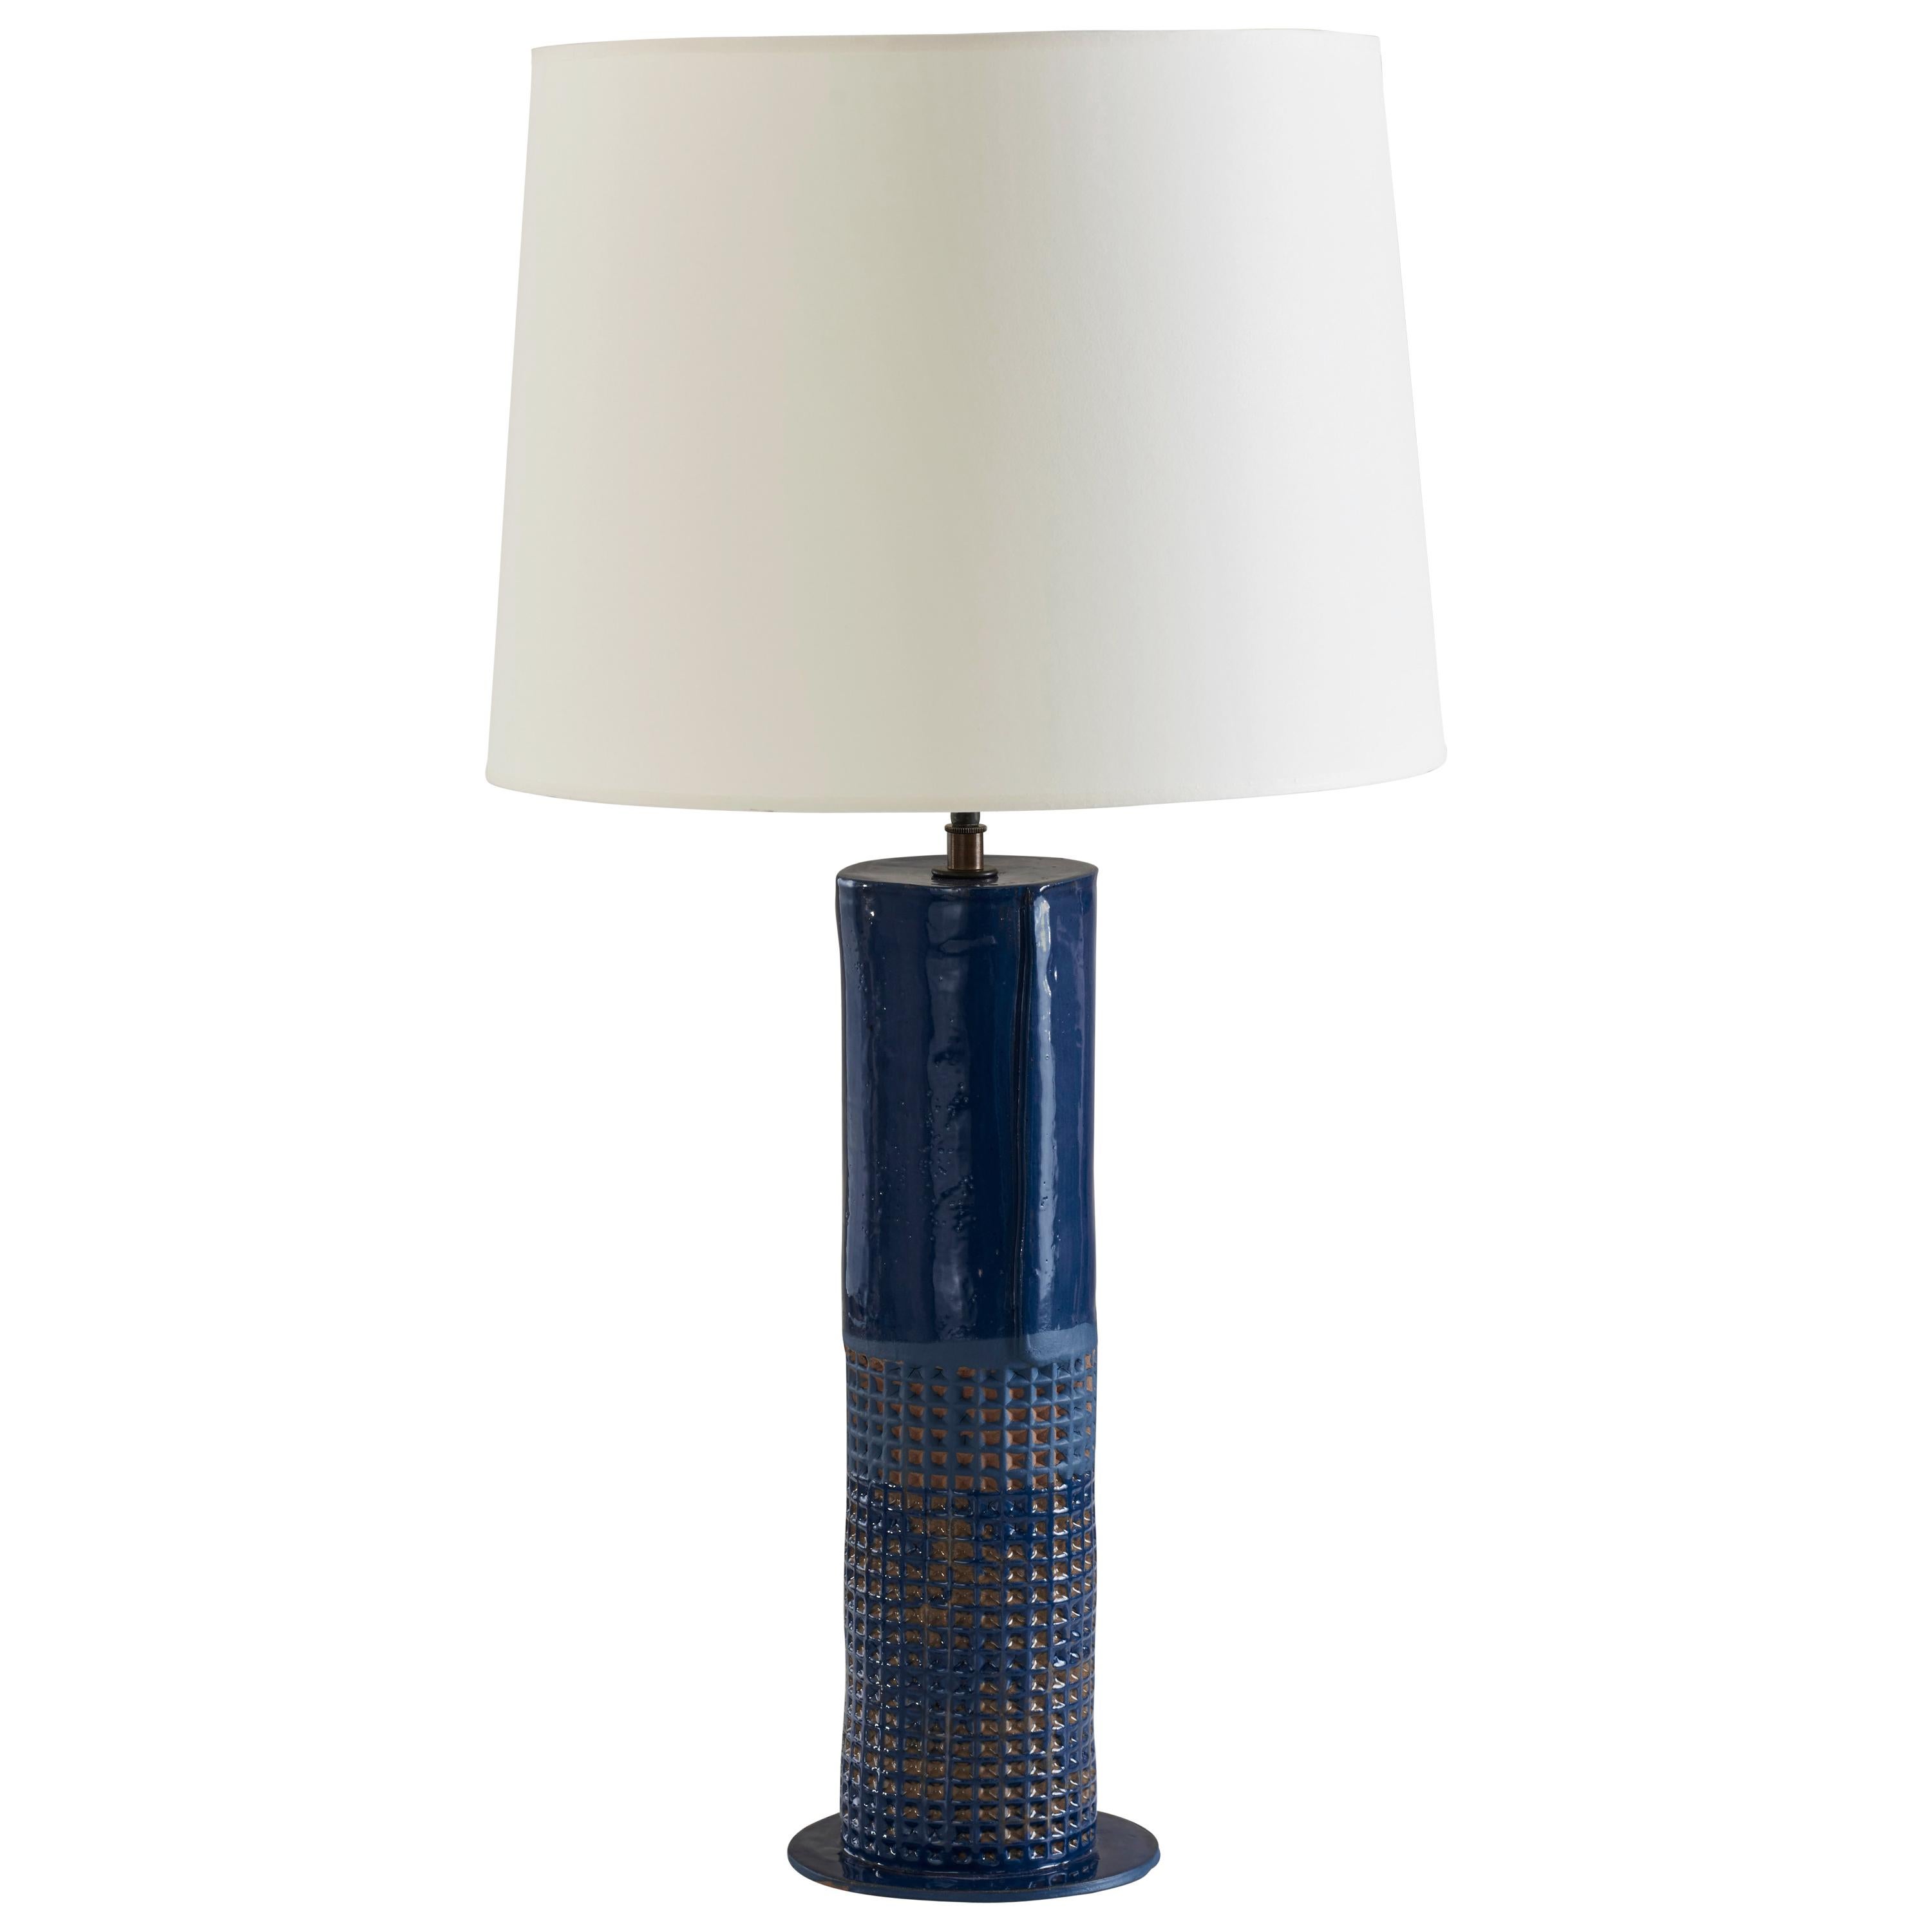 Clermont Lamp, Ceramic Sculptural Table Lamp by Dumais Made